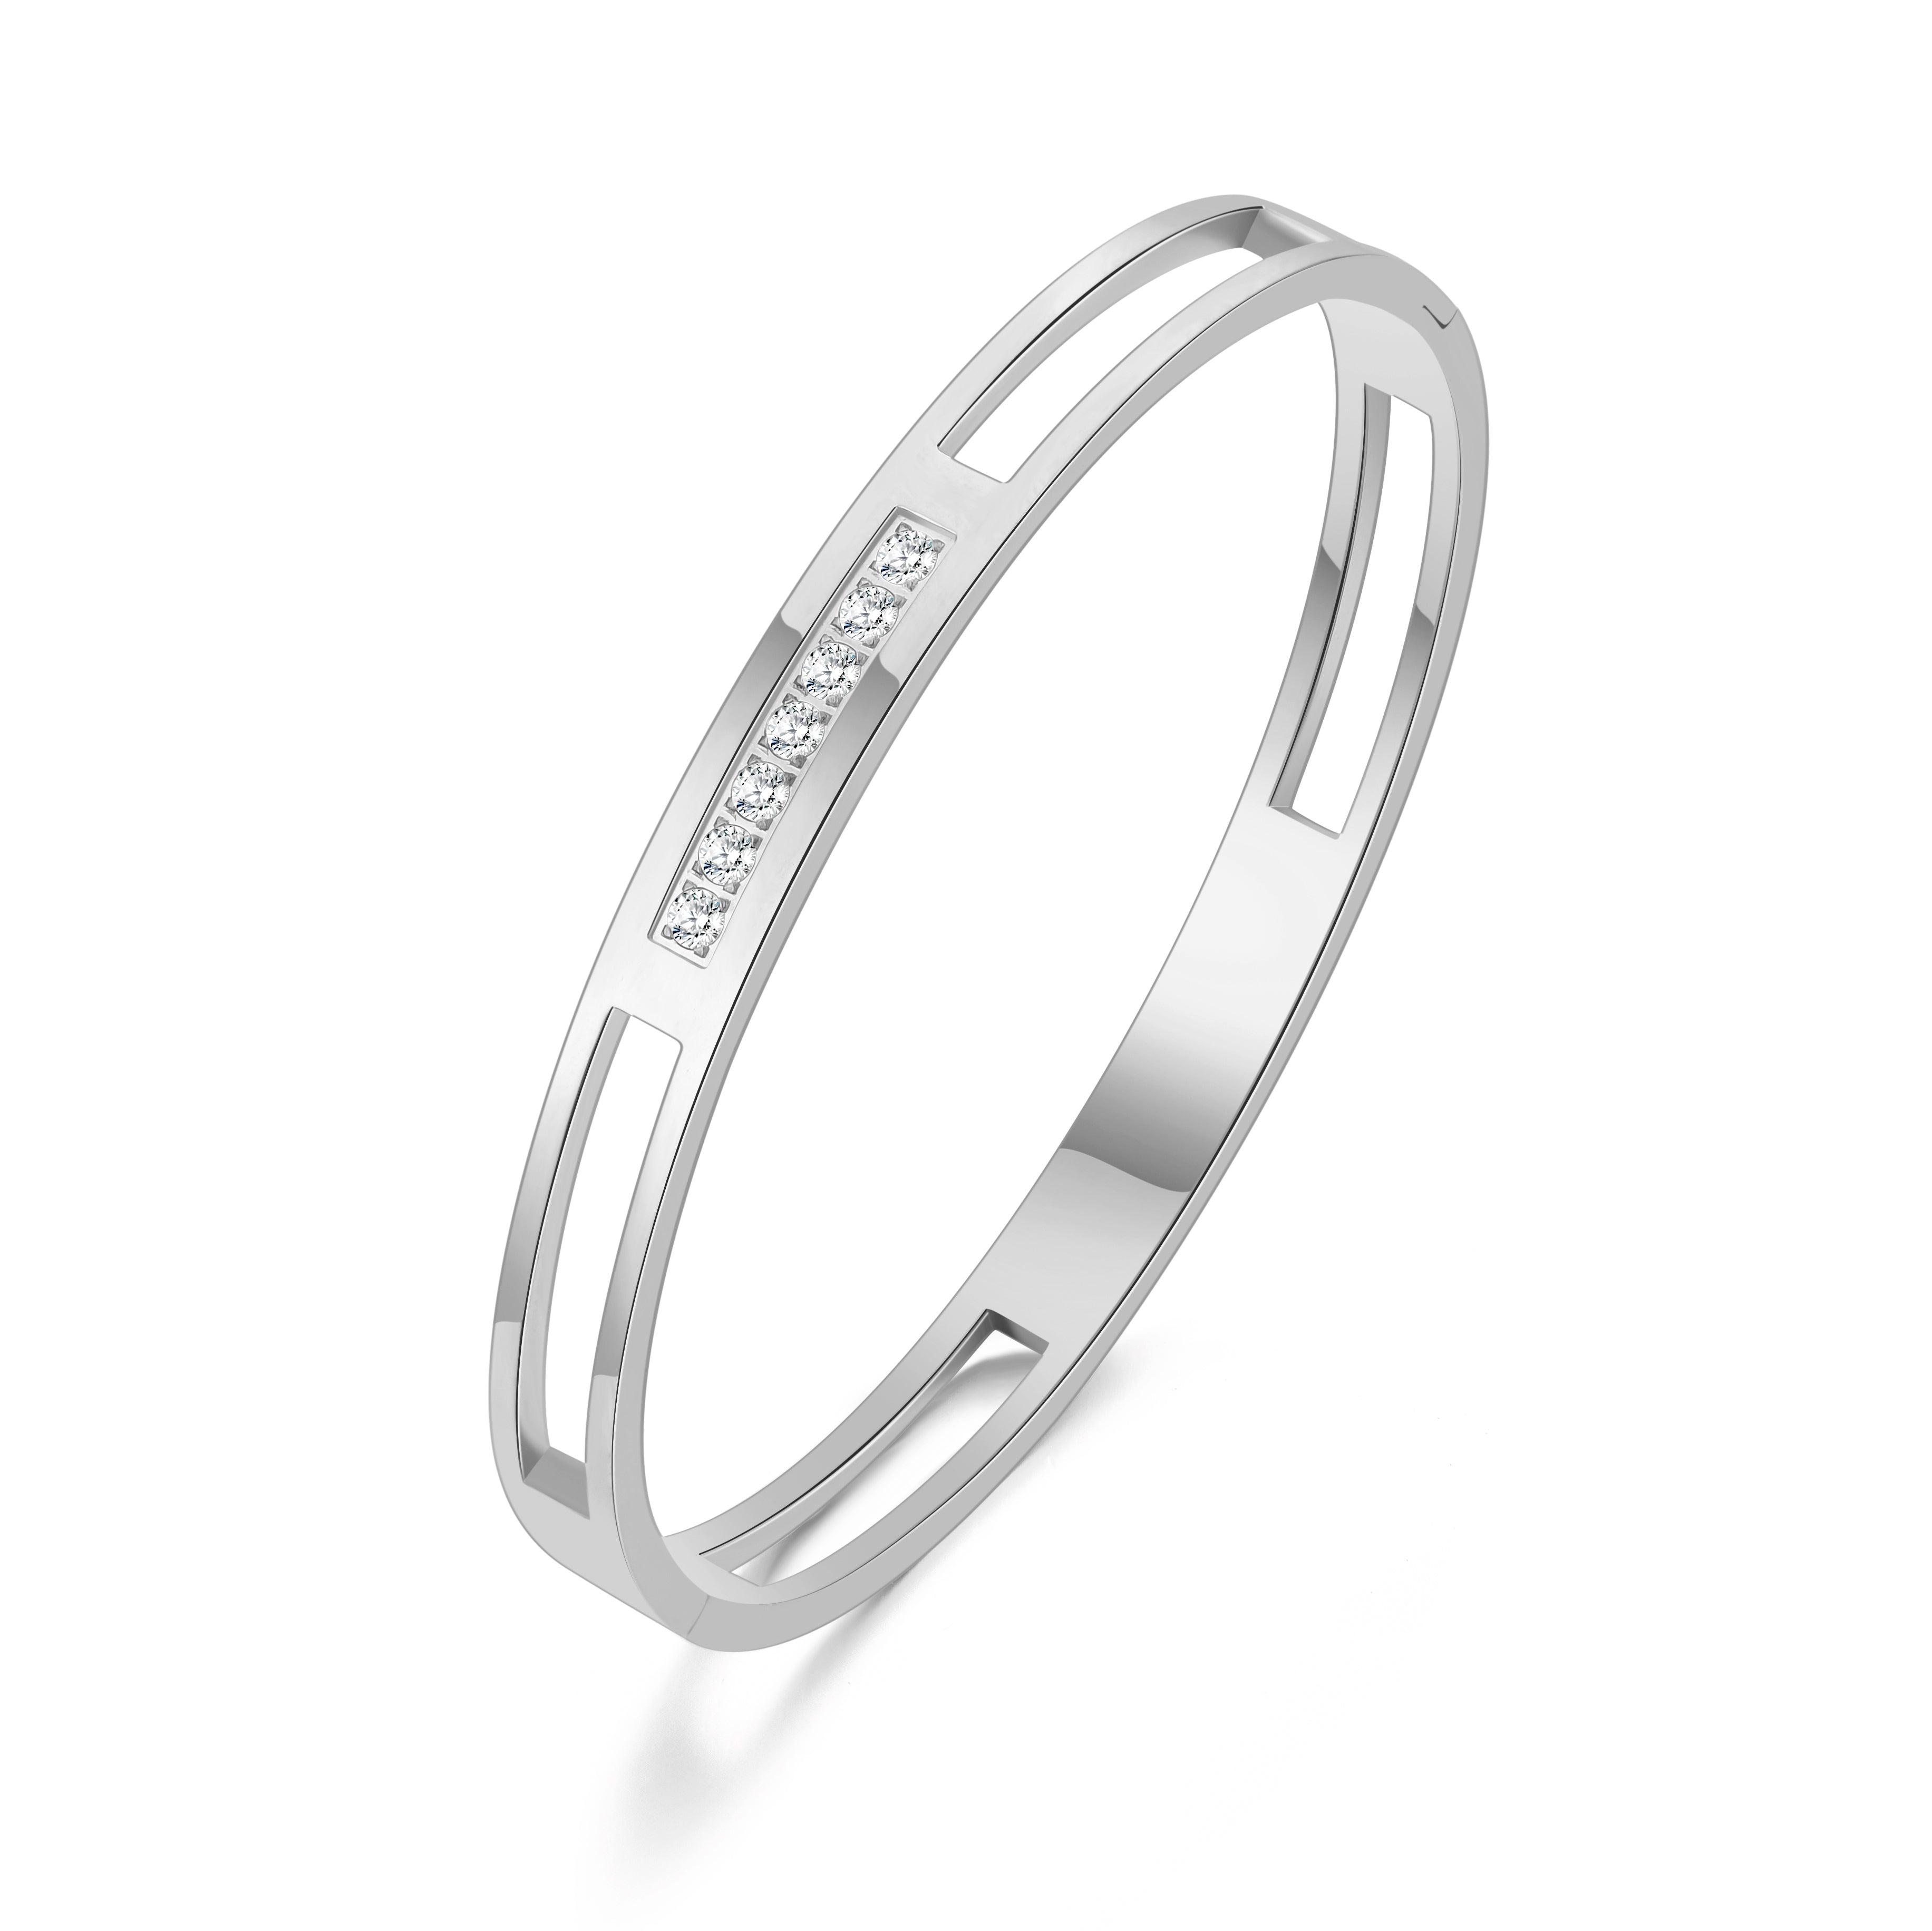 Stainless Steel Channel Bangle Created with Zircondia® Crystals by Philip Jones Jewellery